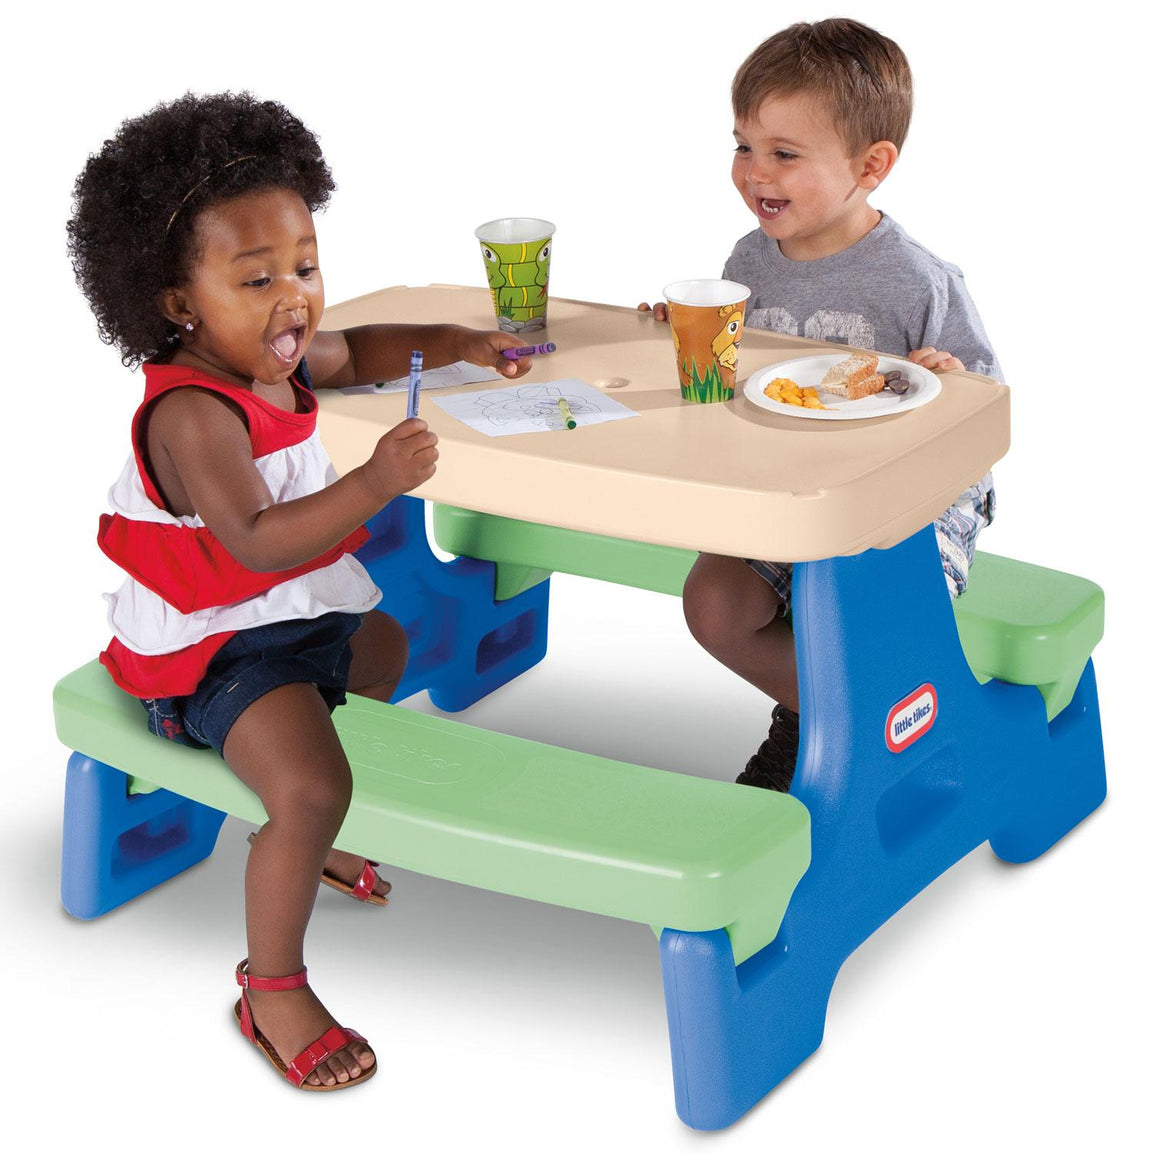 Easy Store Jr. Play Table seats up to 4 kids